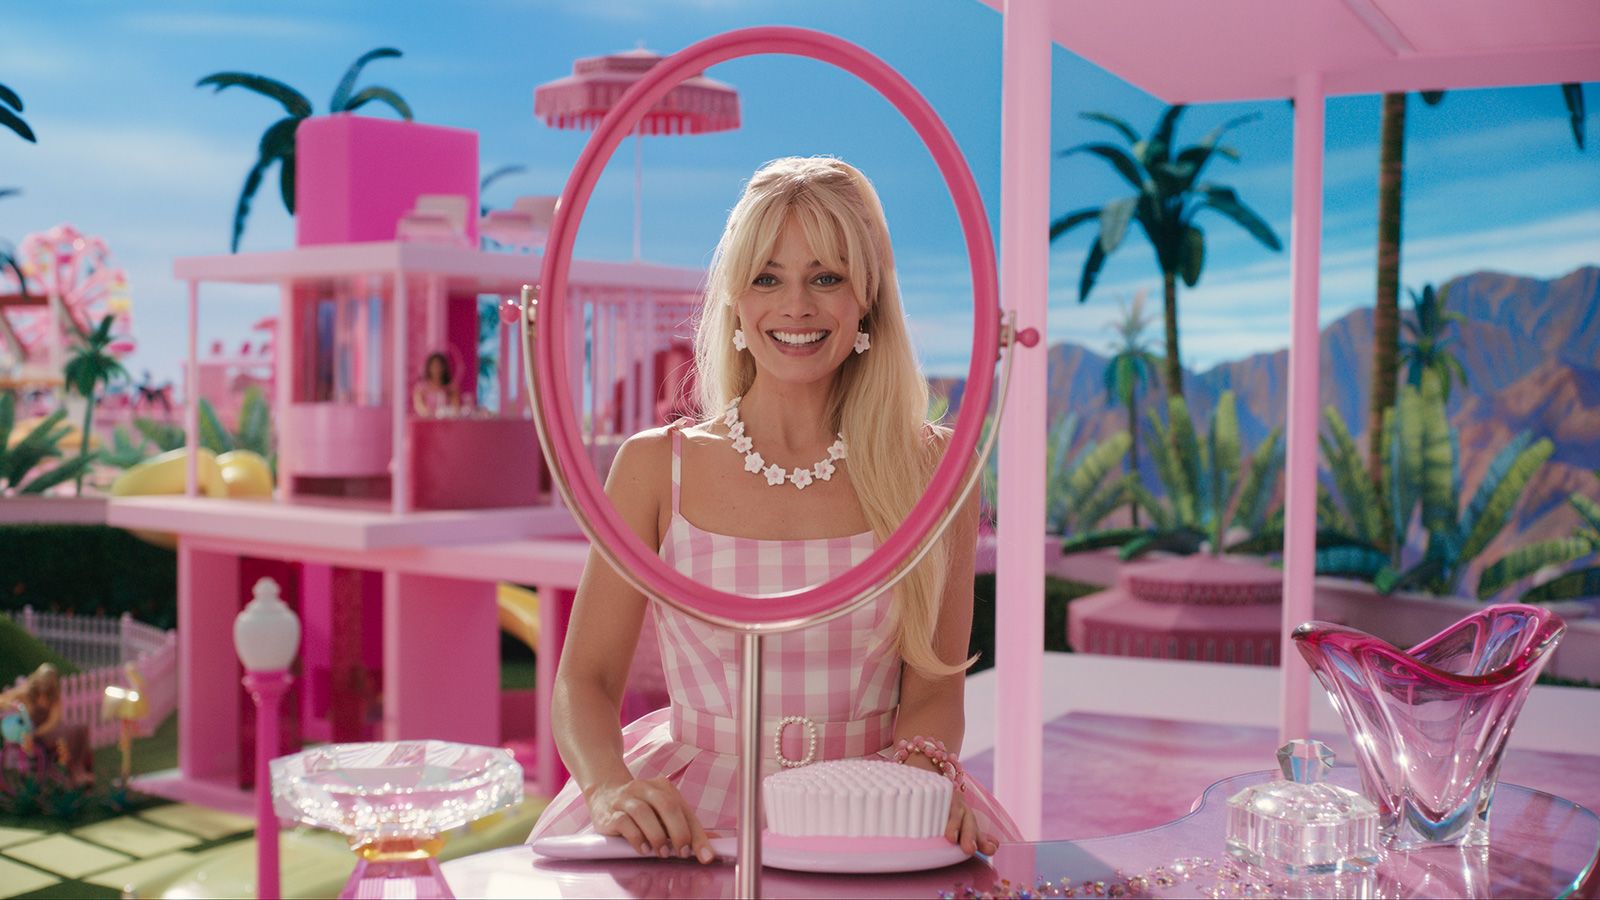 Barbie On The Way To Beat Harry Potter As Warner Bros' Highest Grossing  Movie, Studio Breathes A Sigh Of Relief After Suffering The Worst Box  Office Flop In The History With 'The